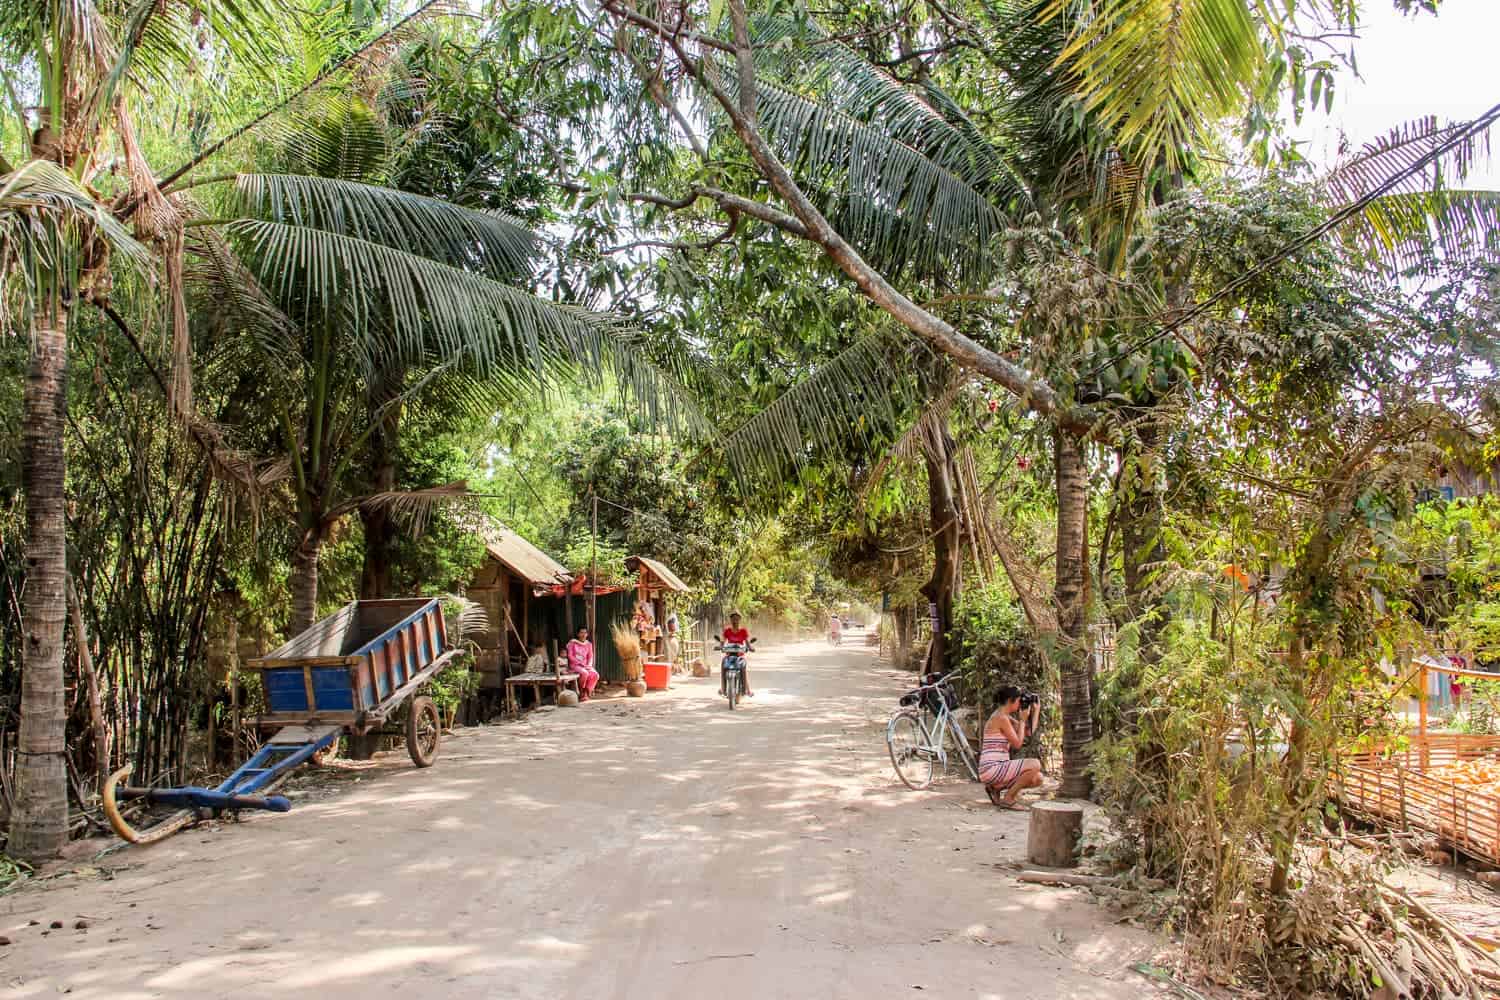 The Island connected to the bamboo bridge crossing in Kampong Cham, Cambodia